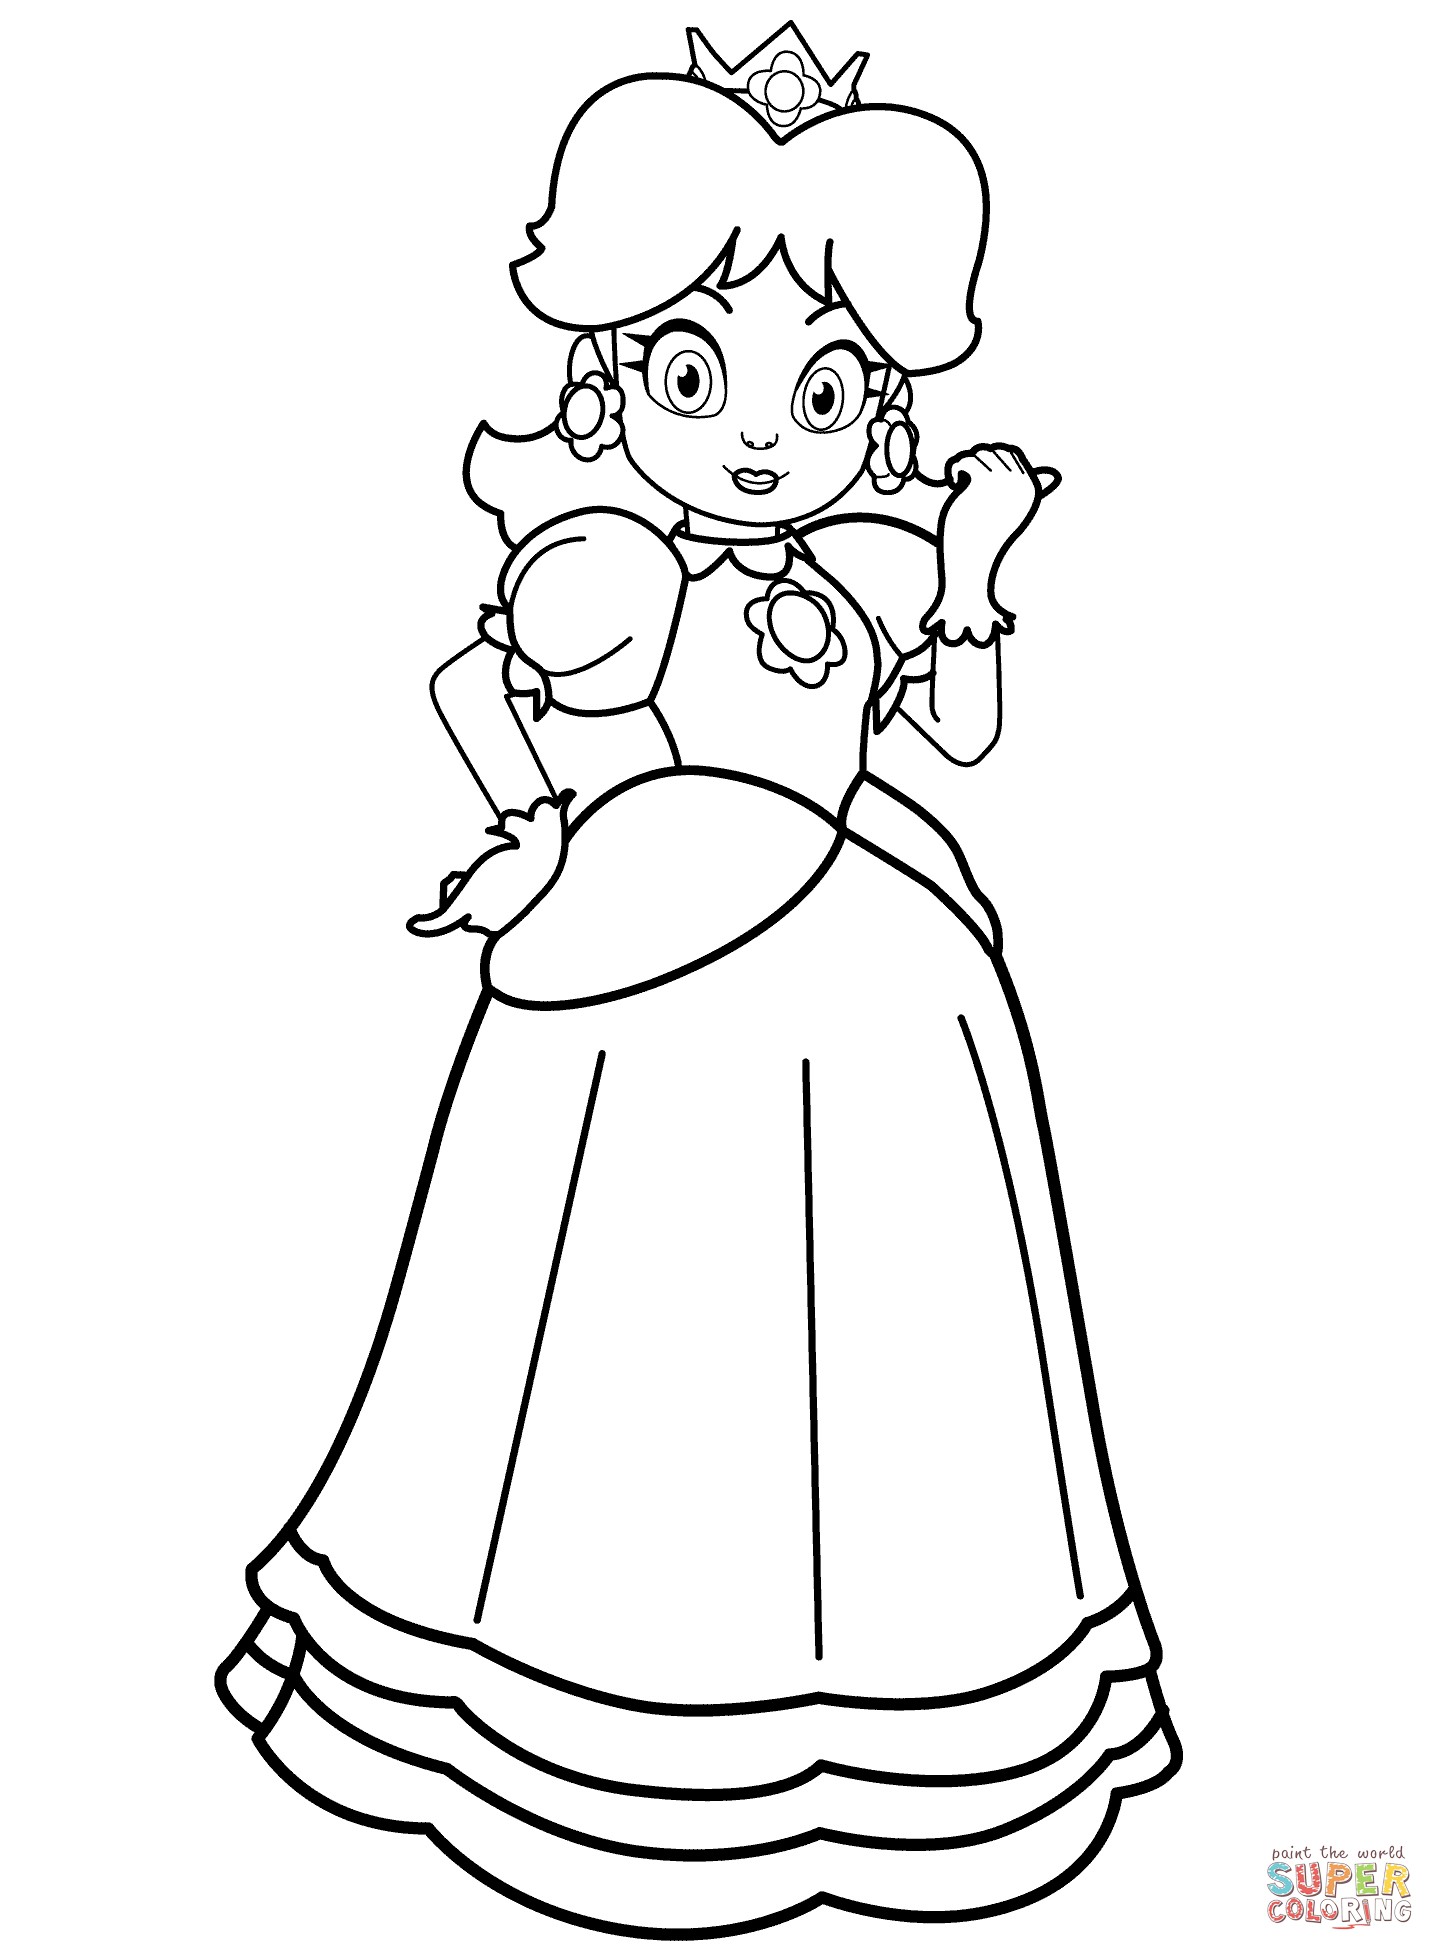 Princess Daisy Coloring Pages 11 with Princess Daisy Coloring Pages